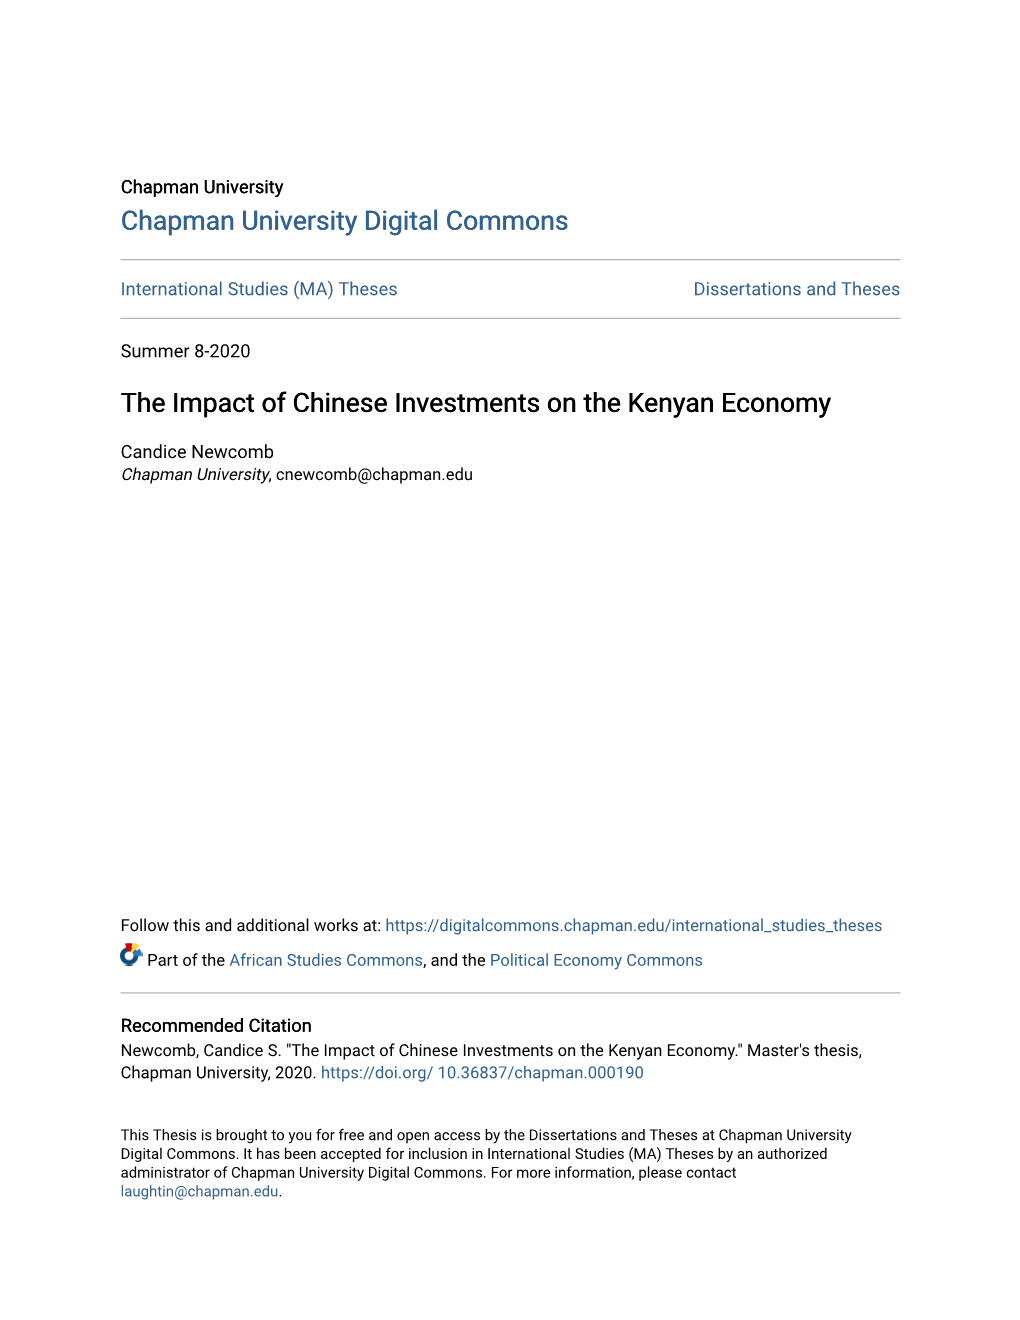 The Impact of Chinese Investments on the Kenyan Economy